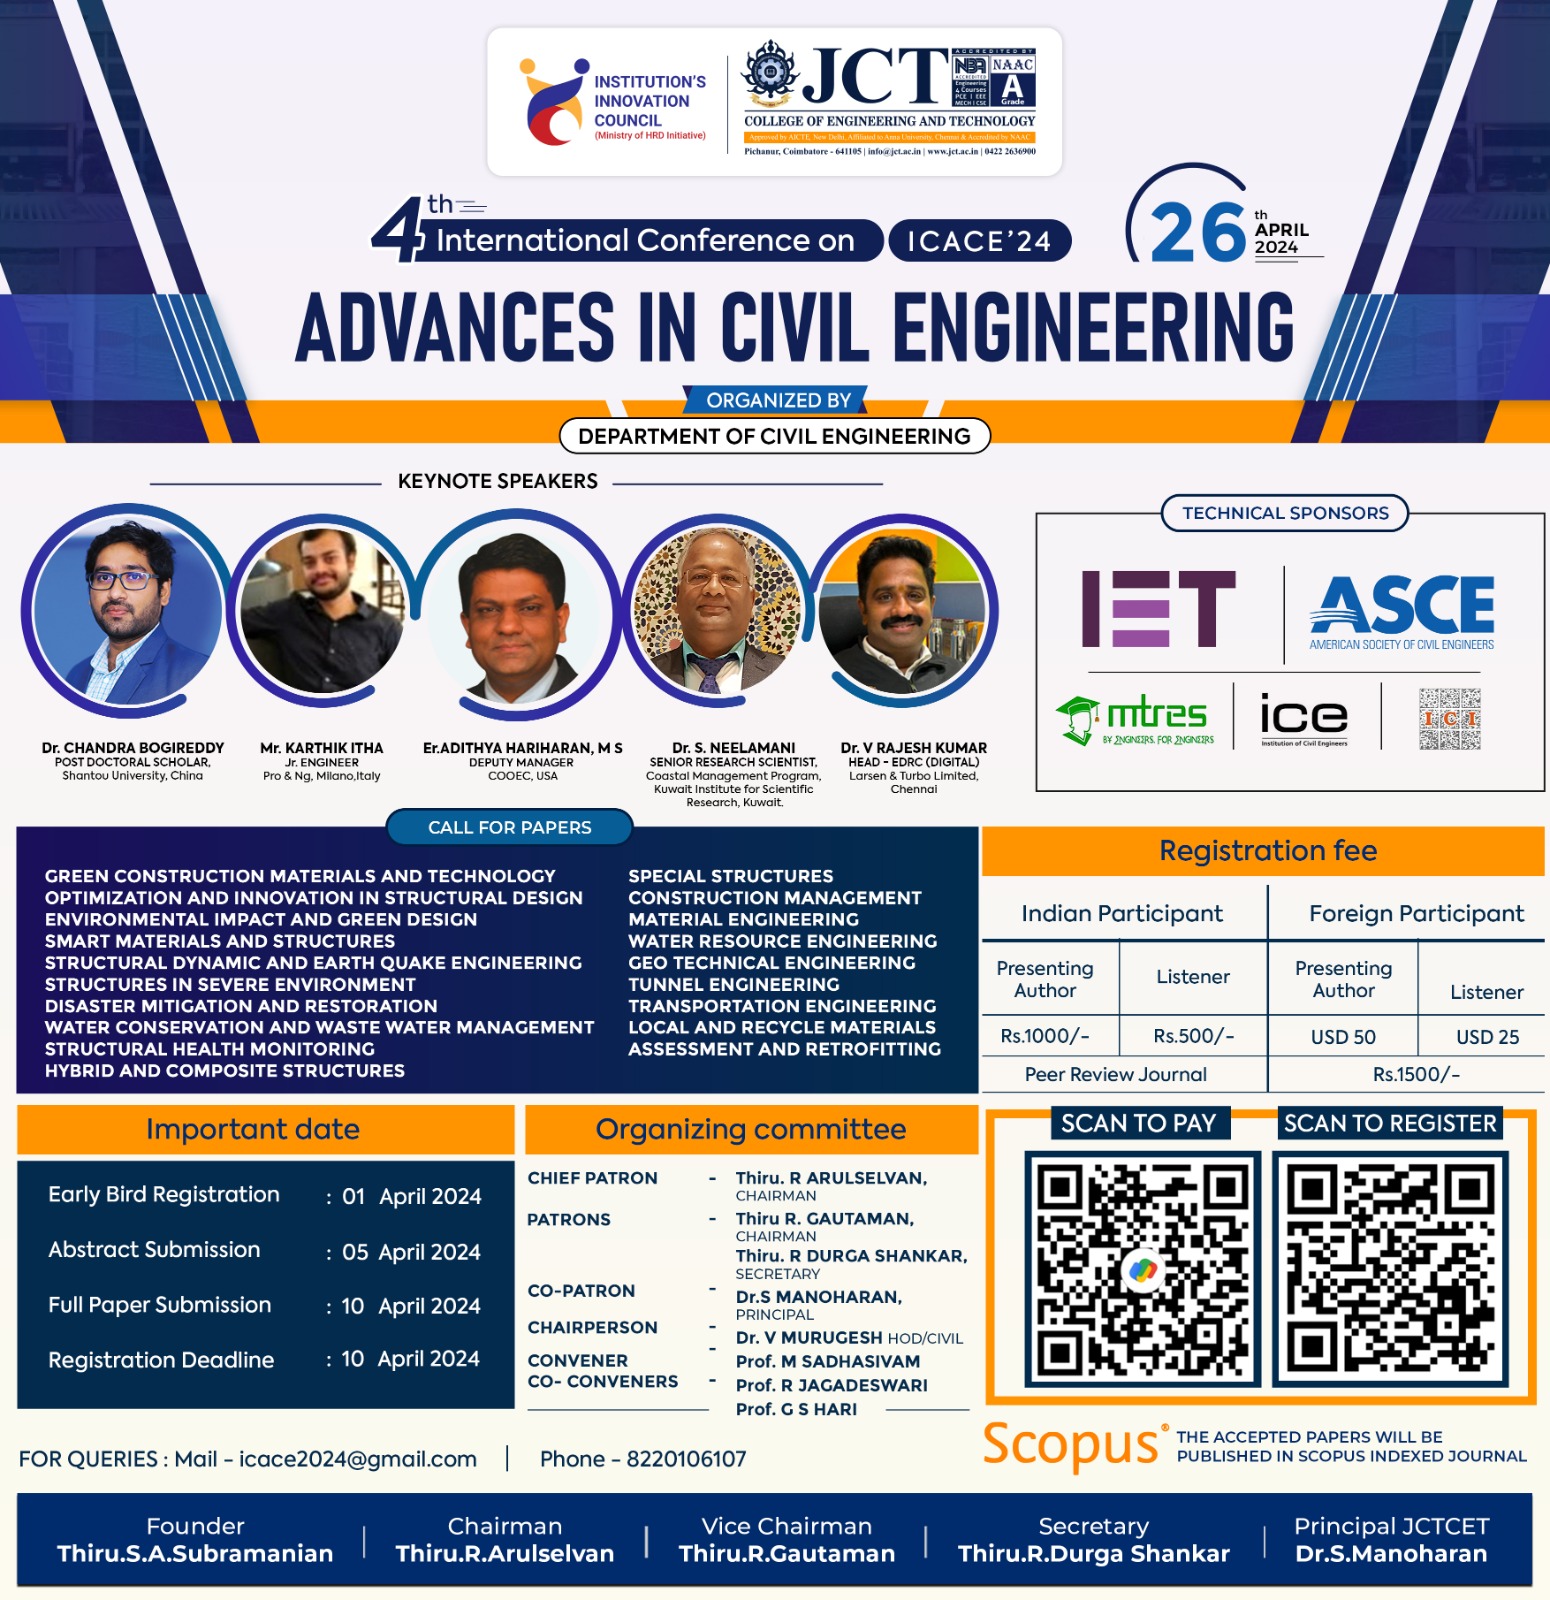 4th International Conference on Advances in Civil Engineering(ICACE'24)